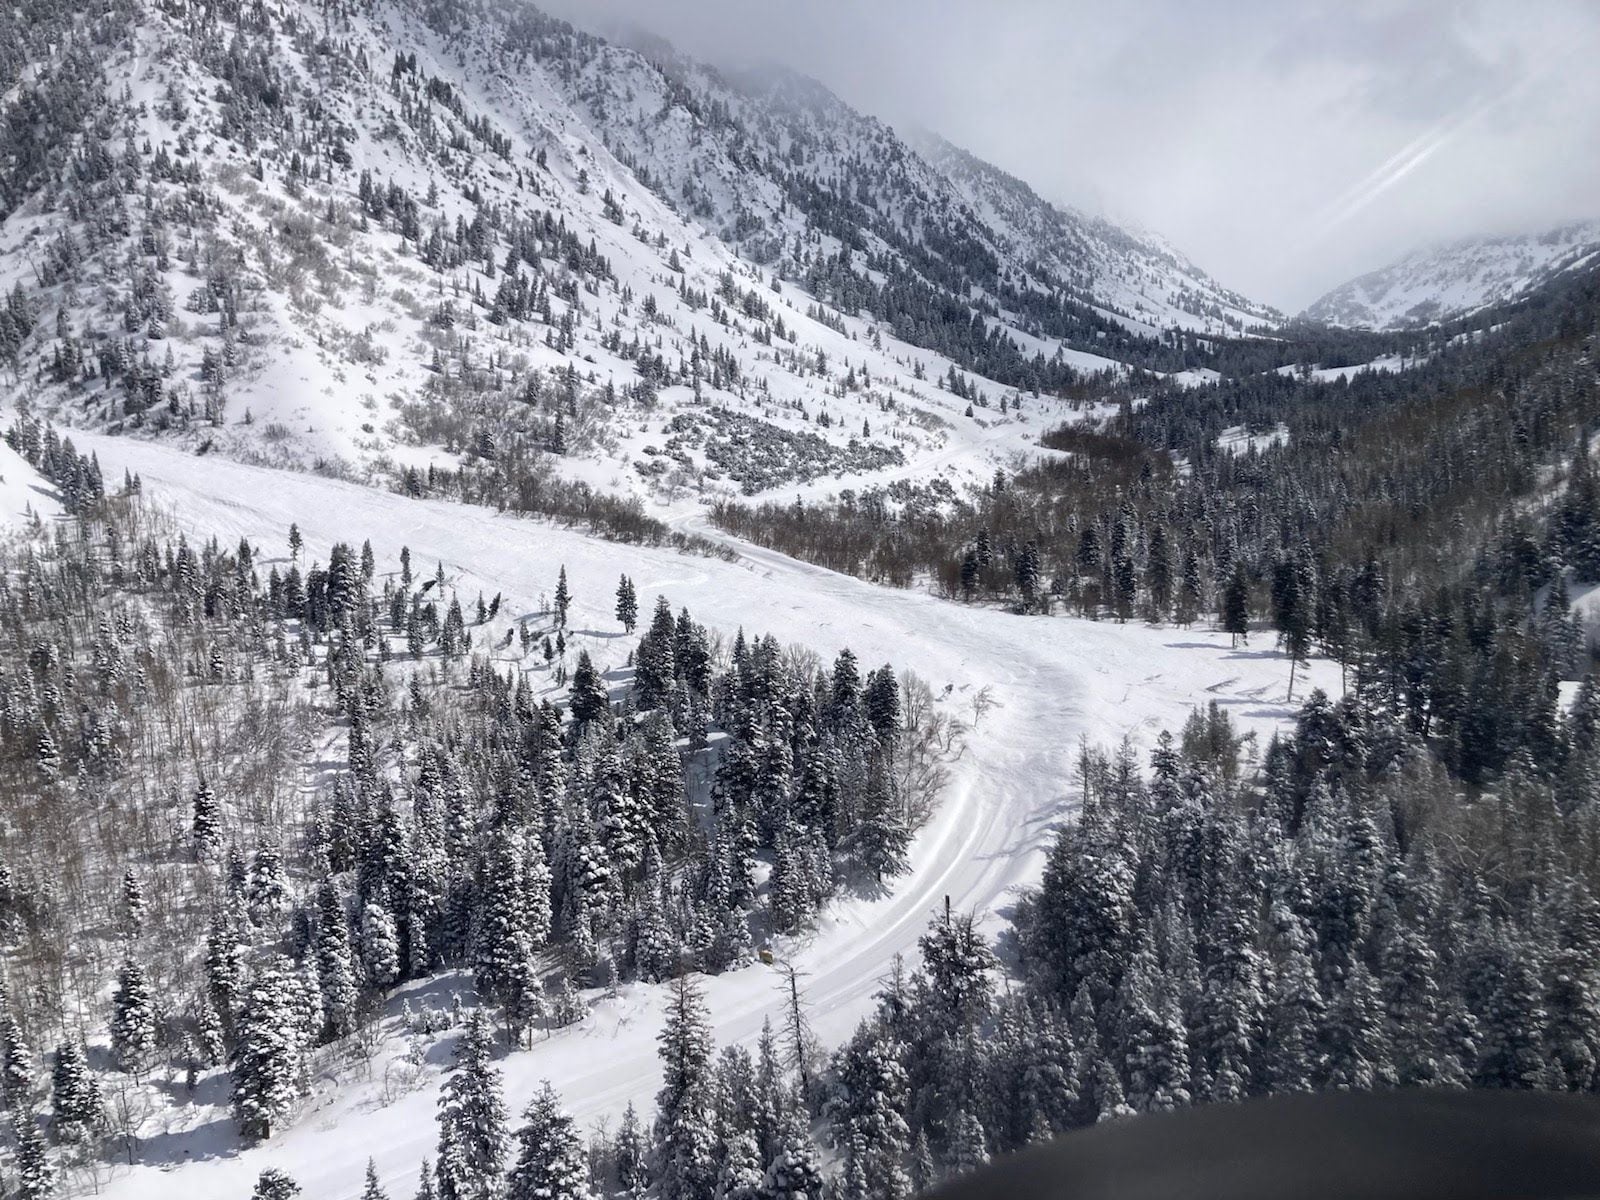 Utah Department of Transportation/contributed This aerial photo shows an avalanche slide in the White Pines area of Little Cottonwood Canyon on Wednesday, April 5, 2023. The highway has been closed since Sunday night due to high and unpredictable avalanche danger and deep snow.